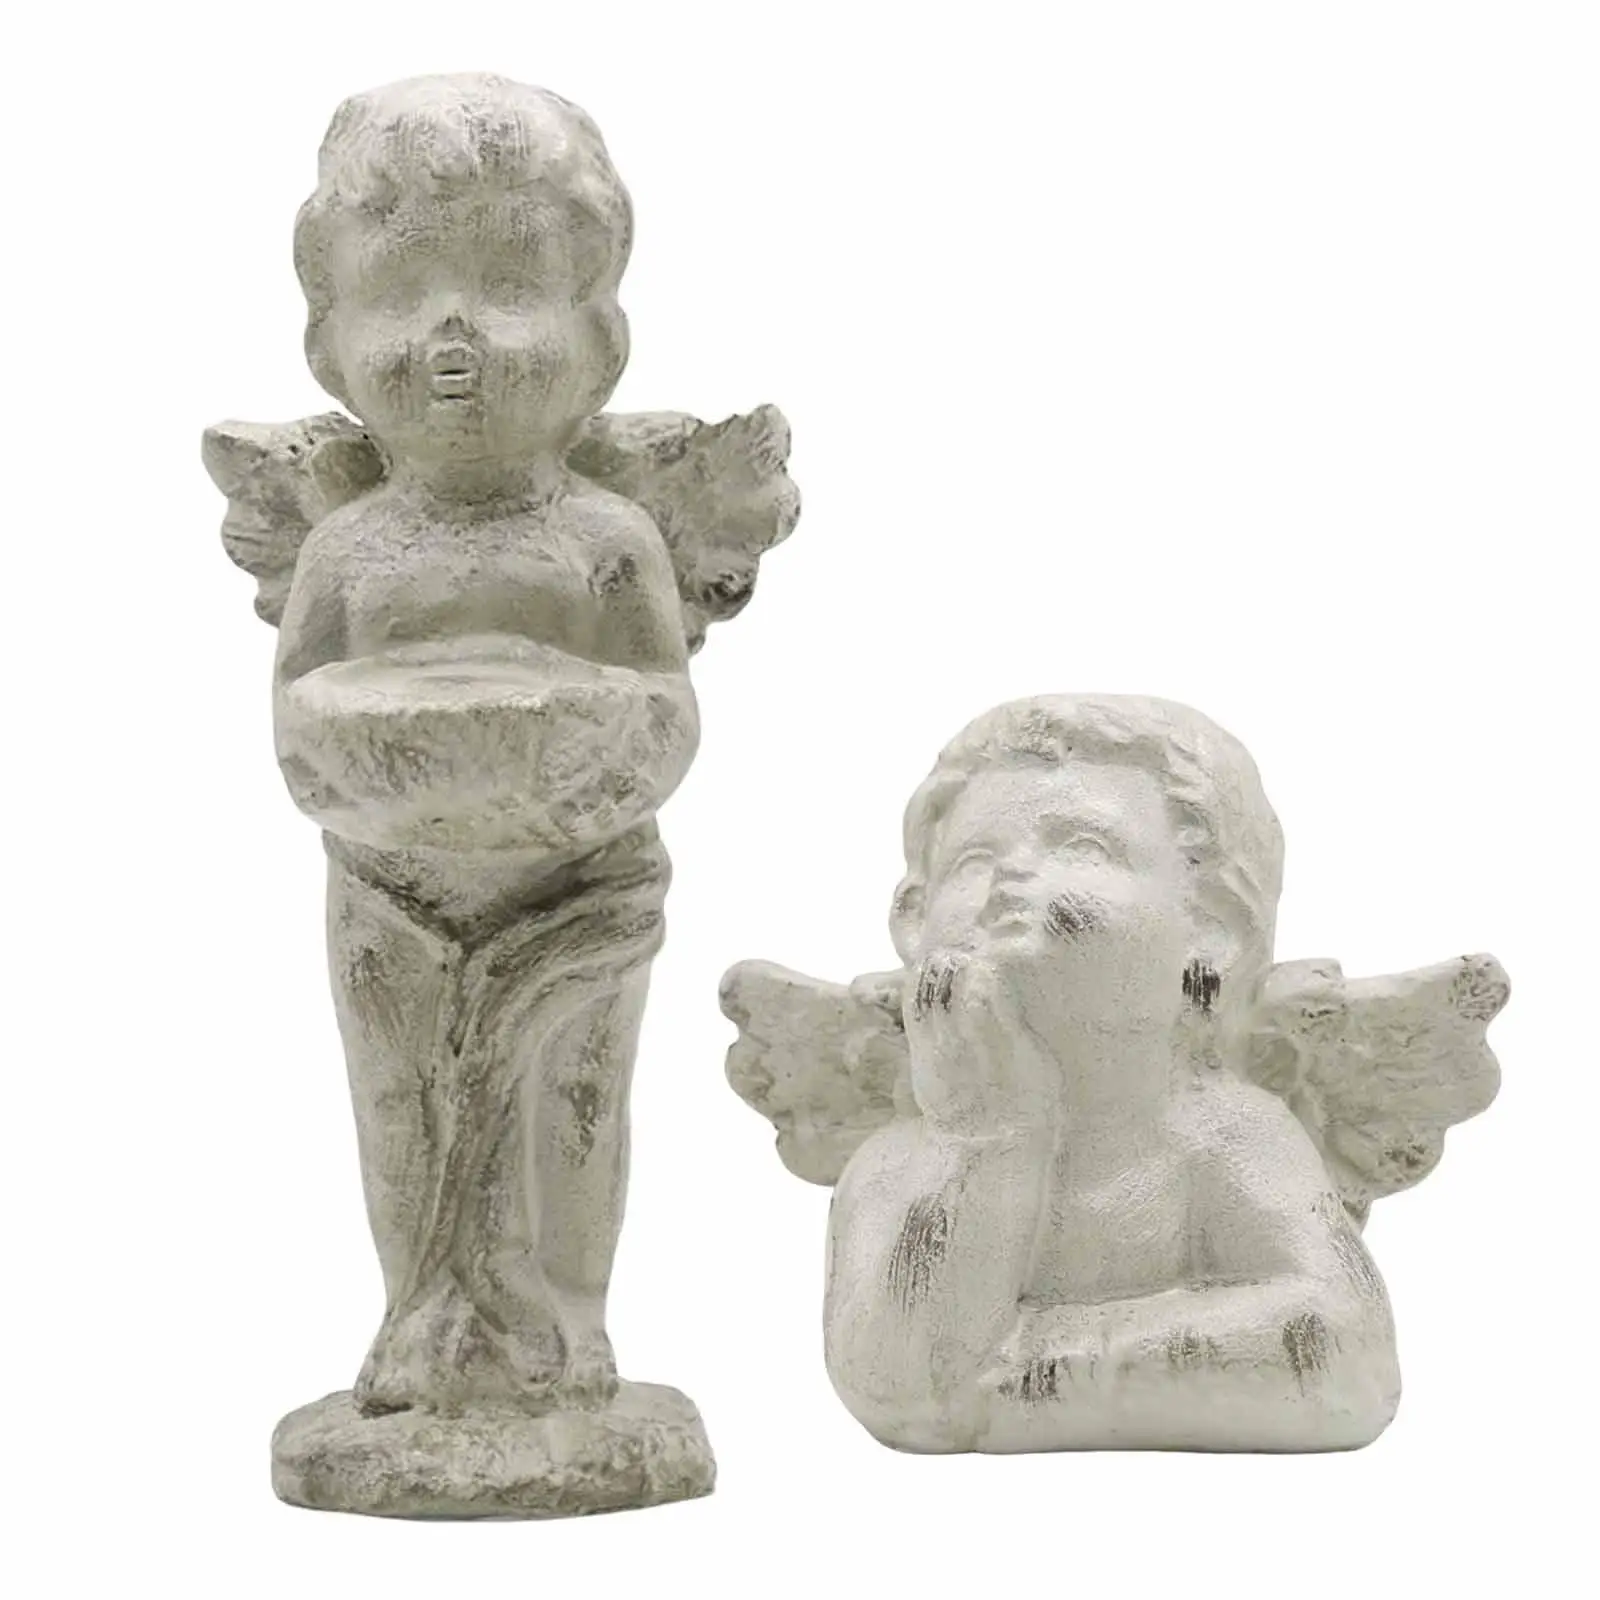 Tealight Candle Holder Decor Candlestick Statue Angel Figurines Candle Stand Table Anniversary Bridal Garden Restaurant